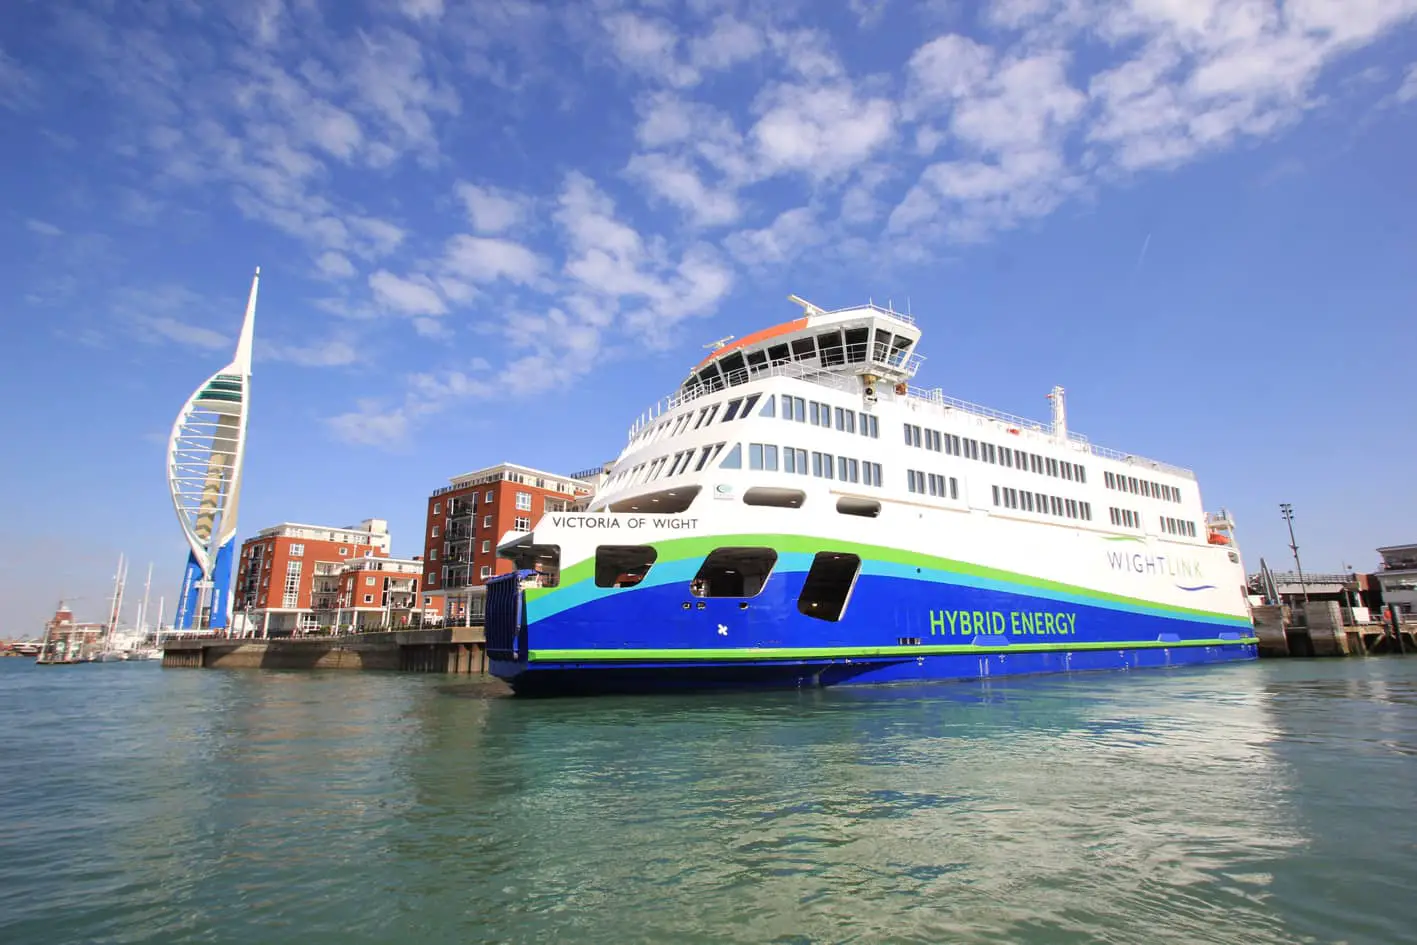 Victoria of Wight in Portsmouth Harbour